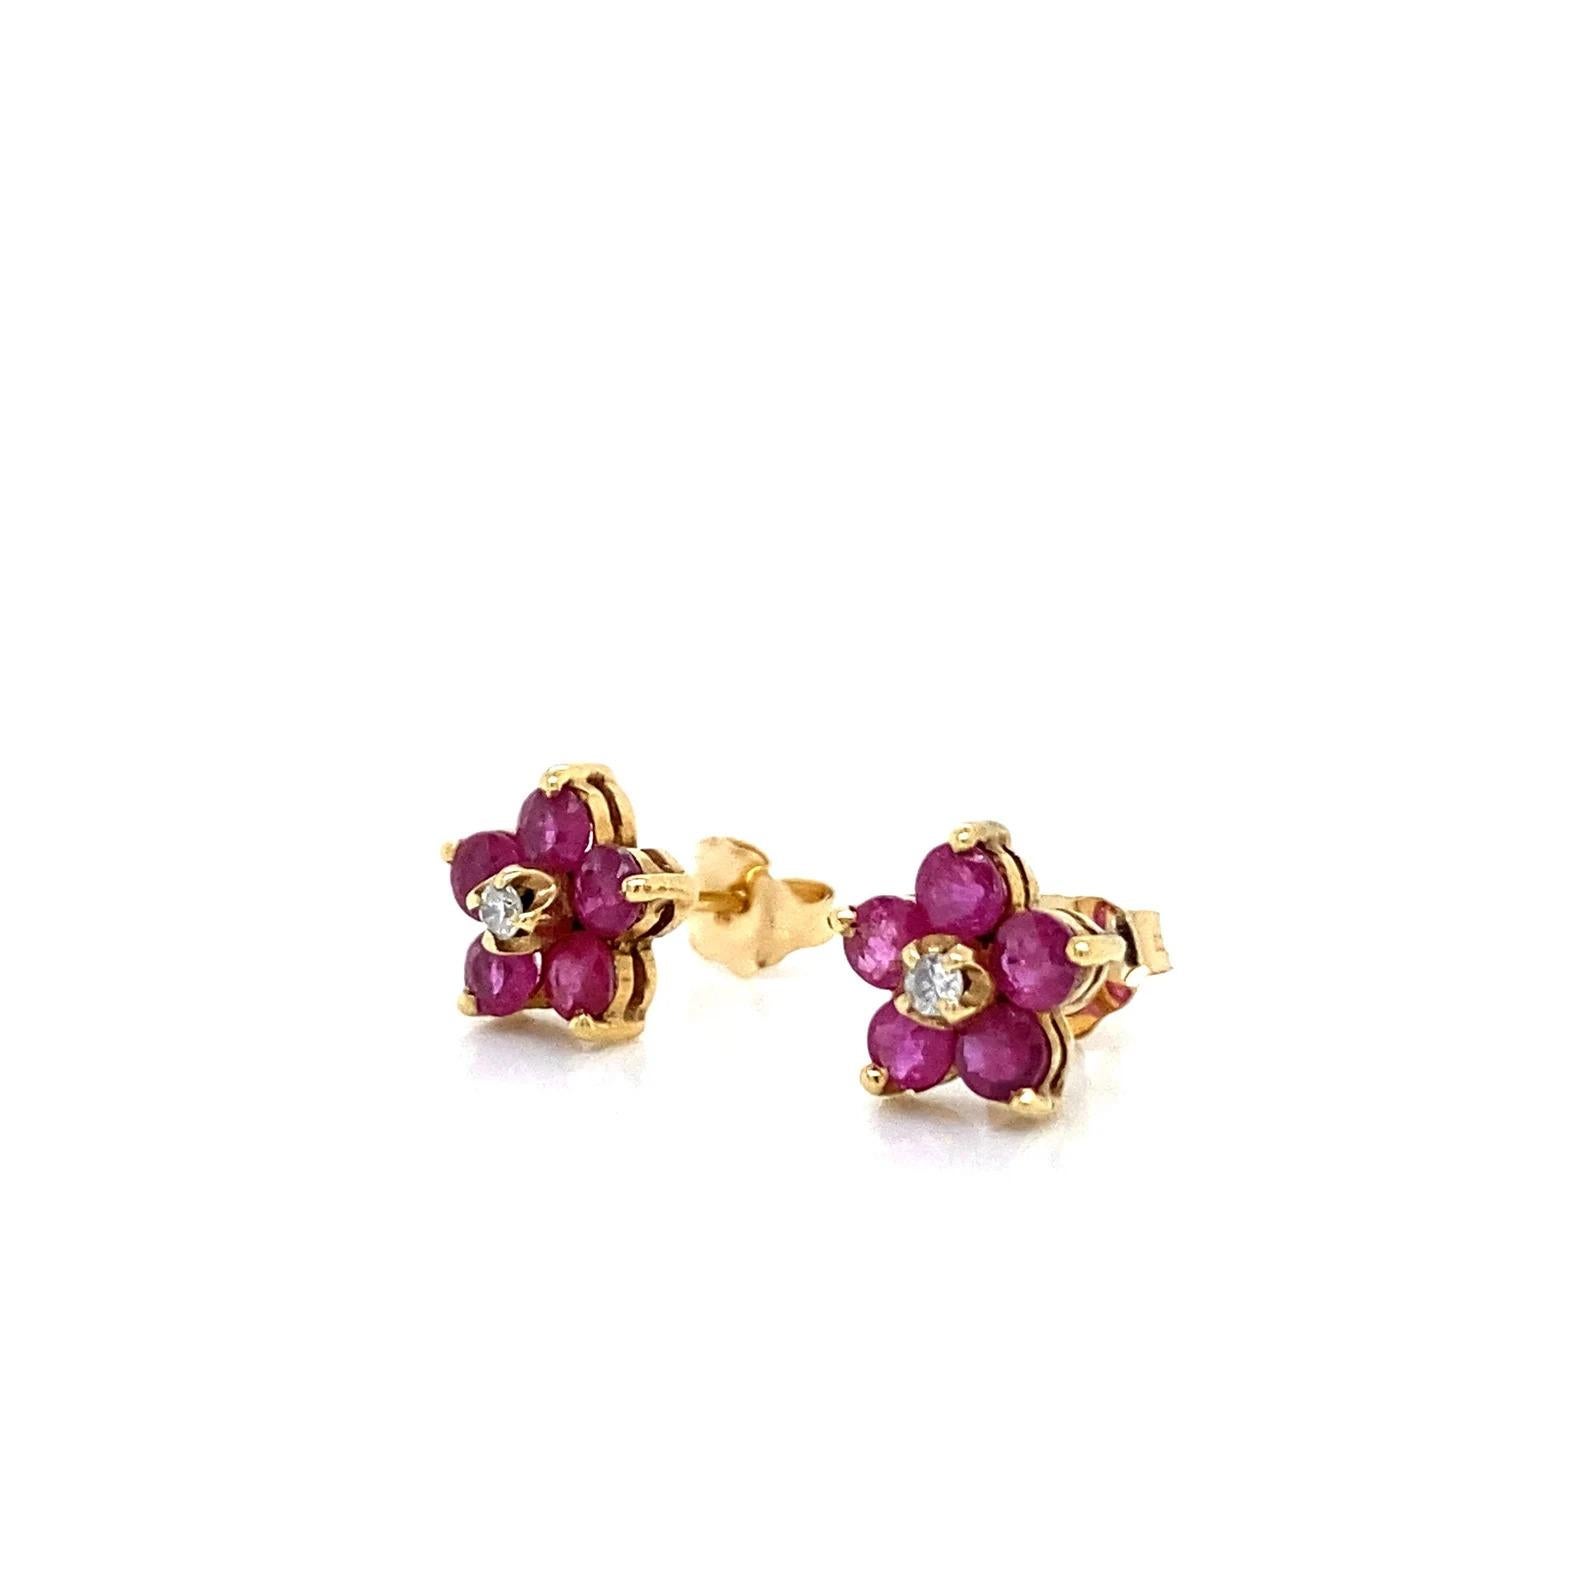 Round Cut 0.84 Total Carat Ruby and Diamond Flower Shaped Push Back Earrings in 14K Gold For Sale